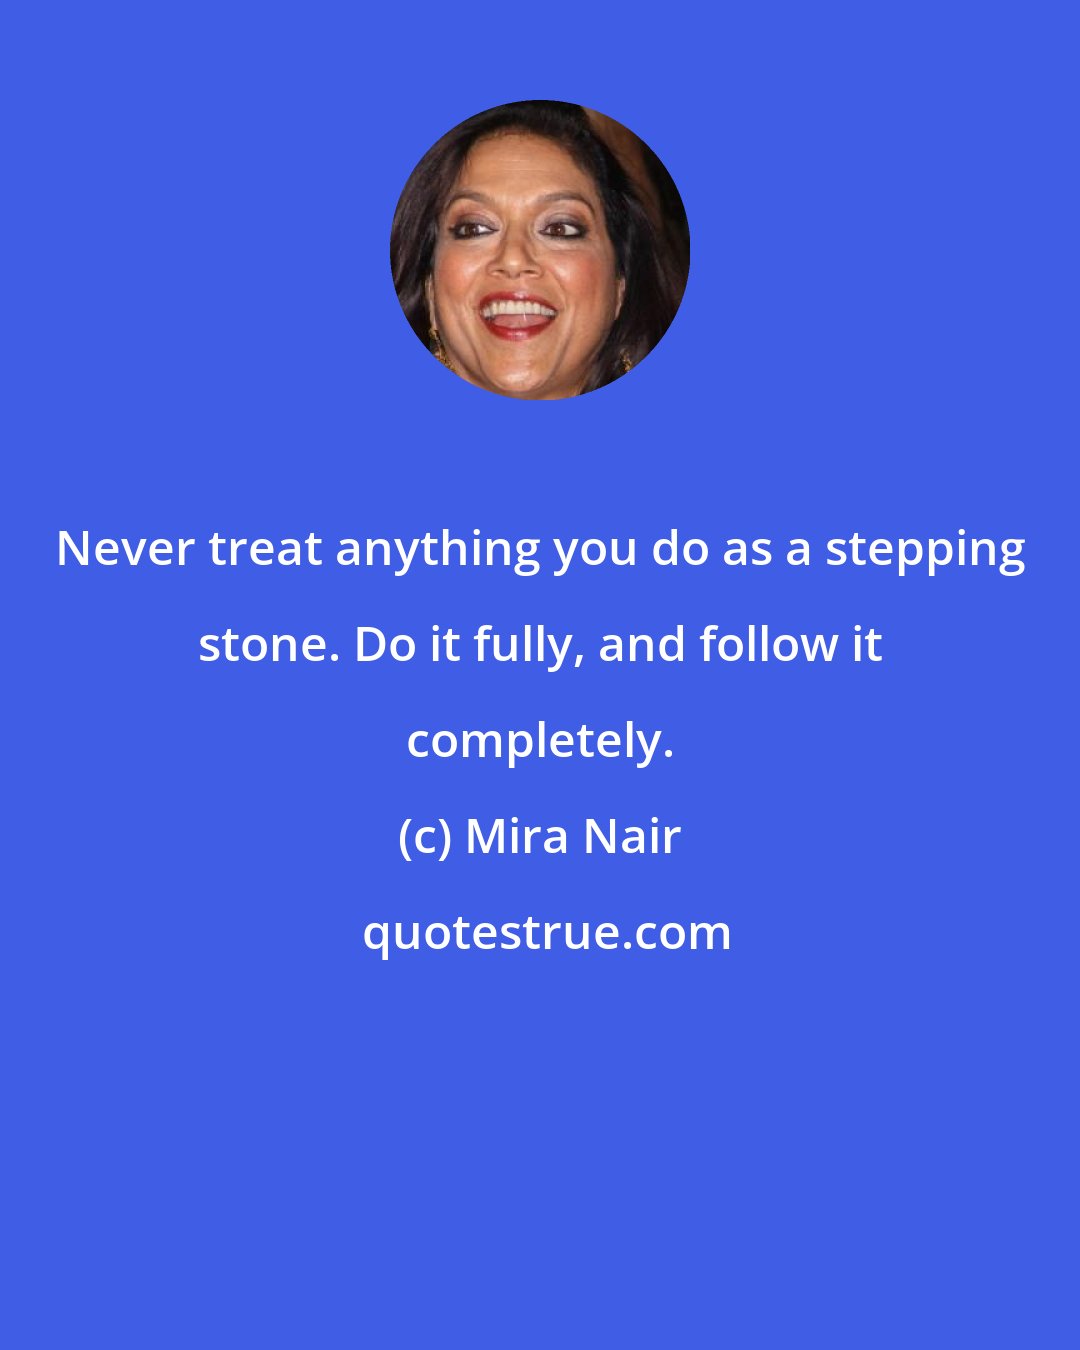 Mira Nair: Never treat anything you do as a stepping stone. Do it fully, and follow it completely.